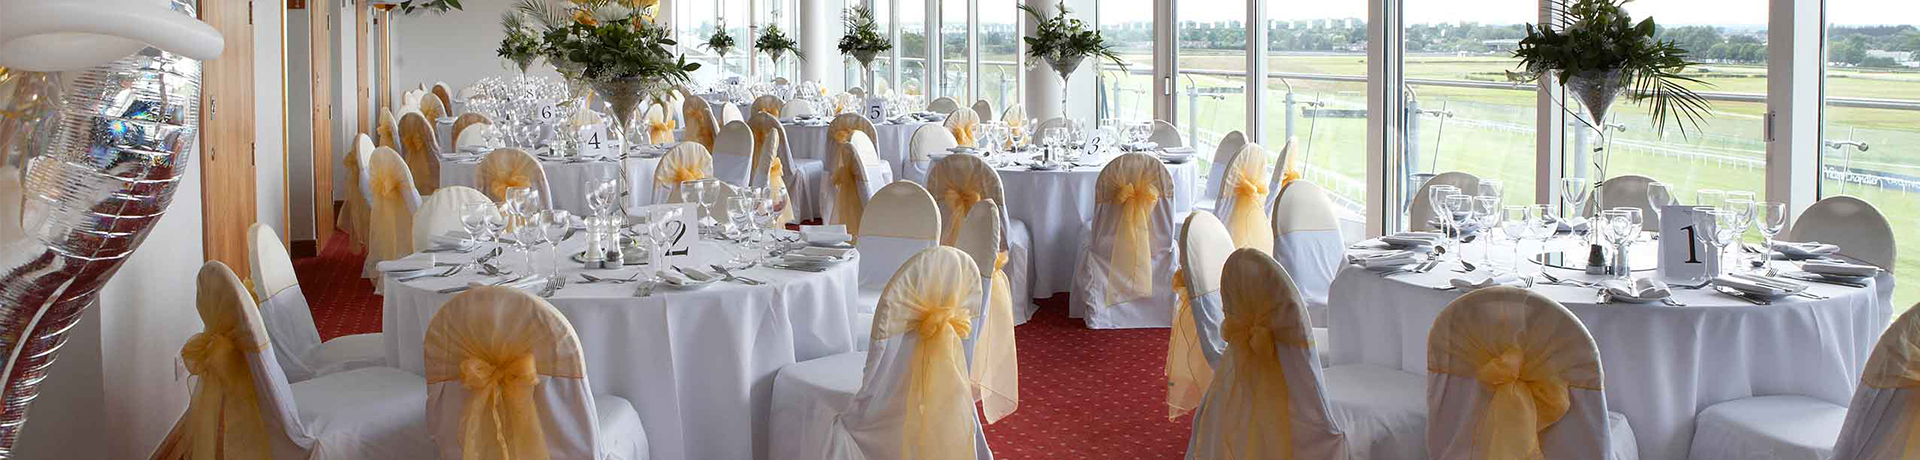 Wetherby Racecourse & Conference Centre